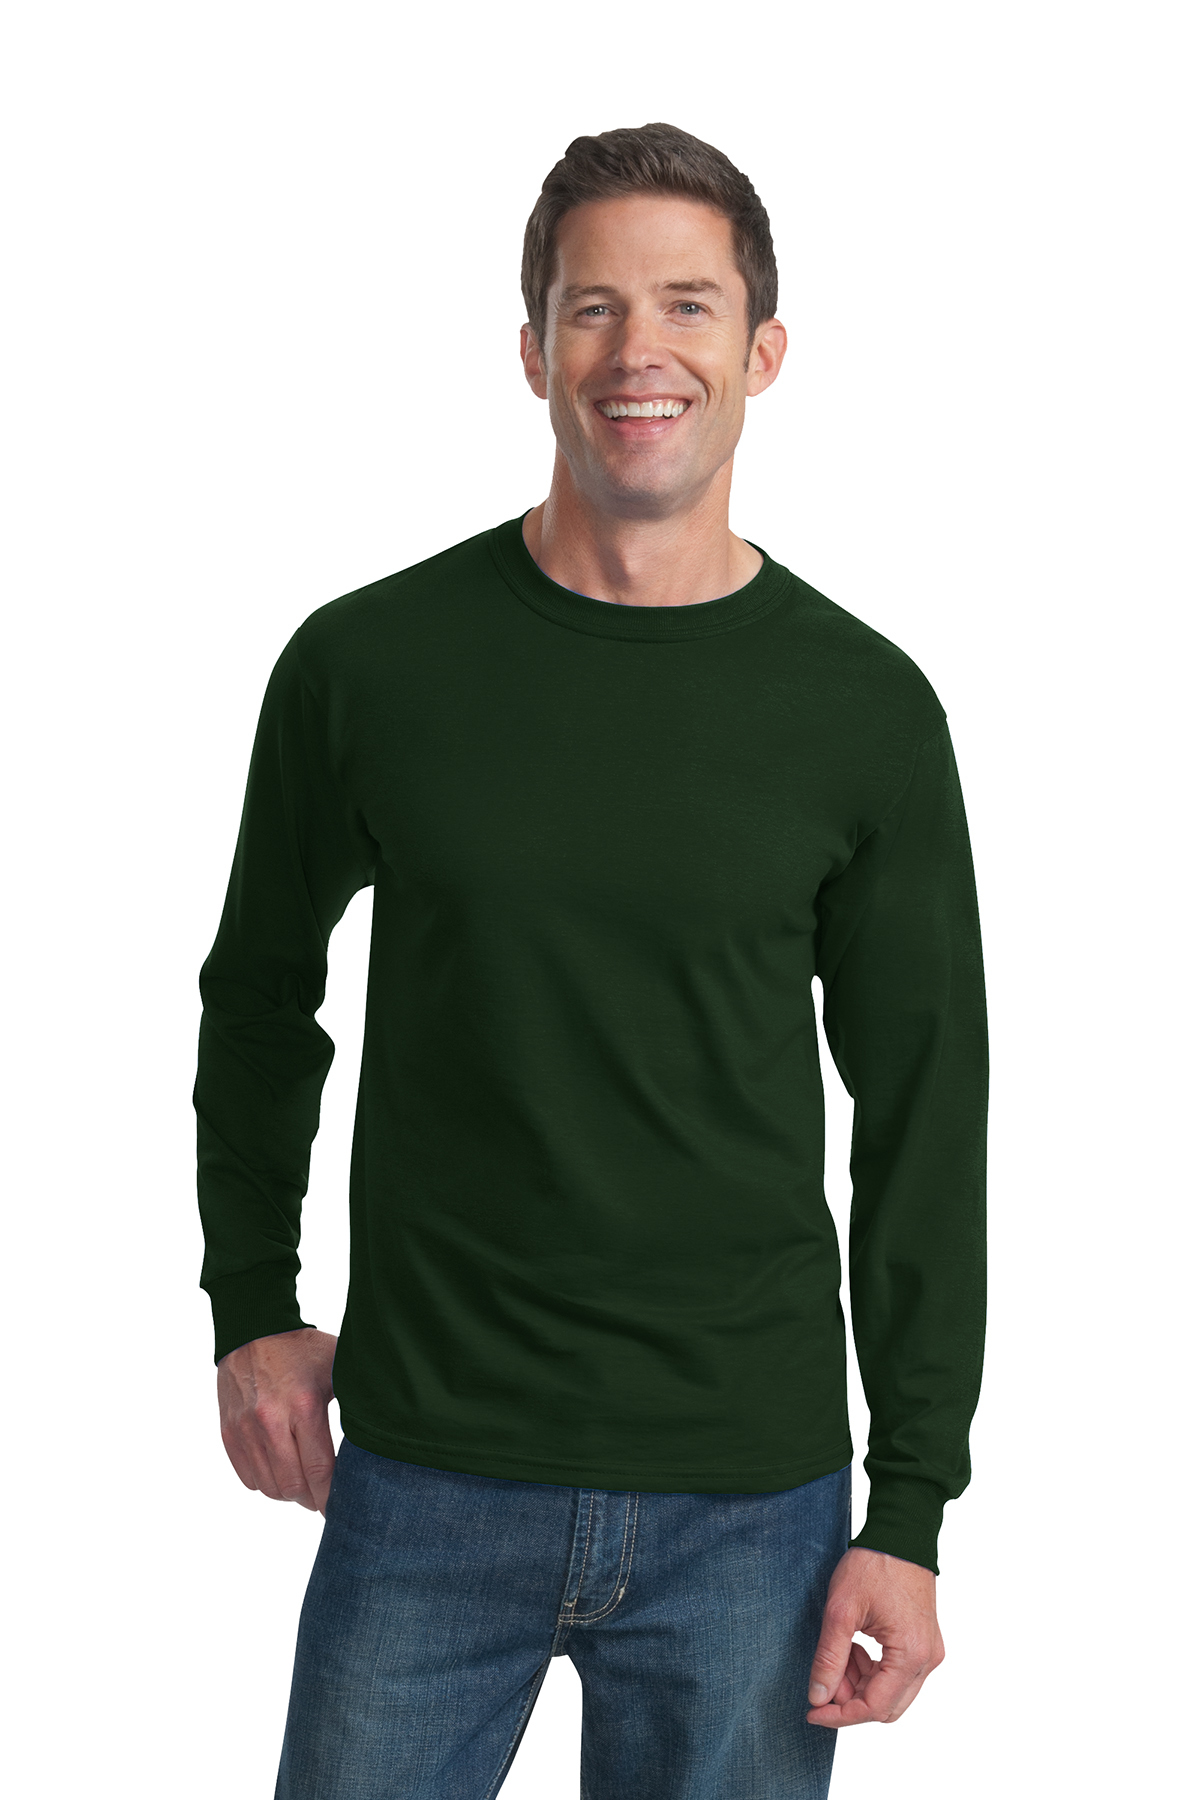 Fruit of the Loom HD Cotton 100% Cotton Long Sleeve T-Shirt | Product ...